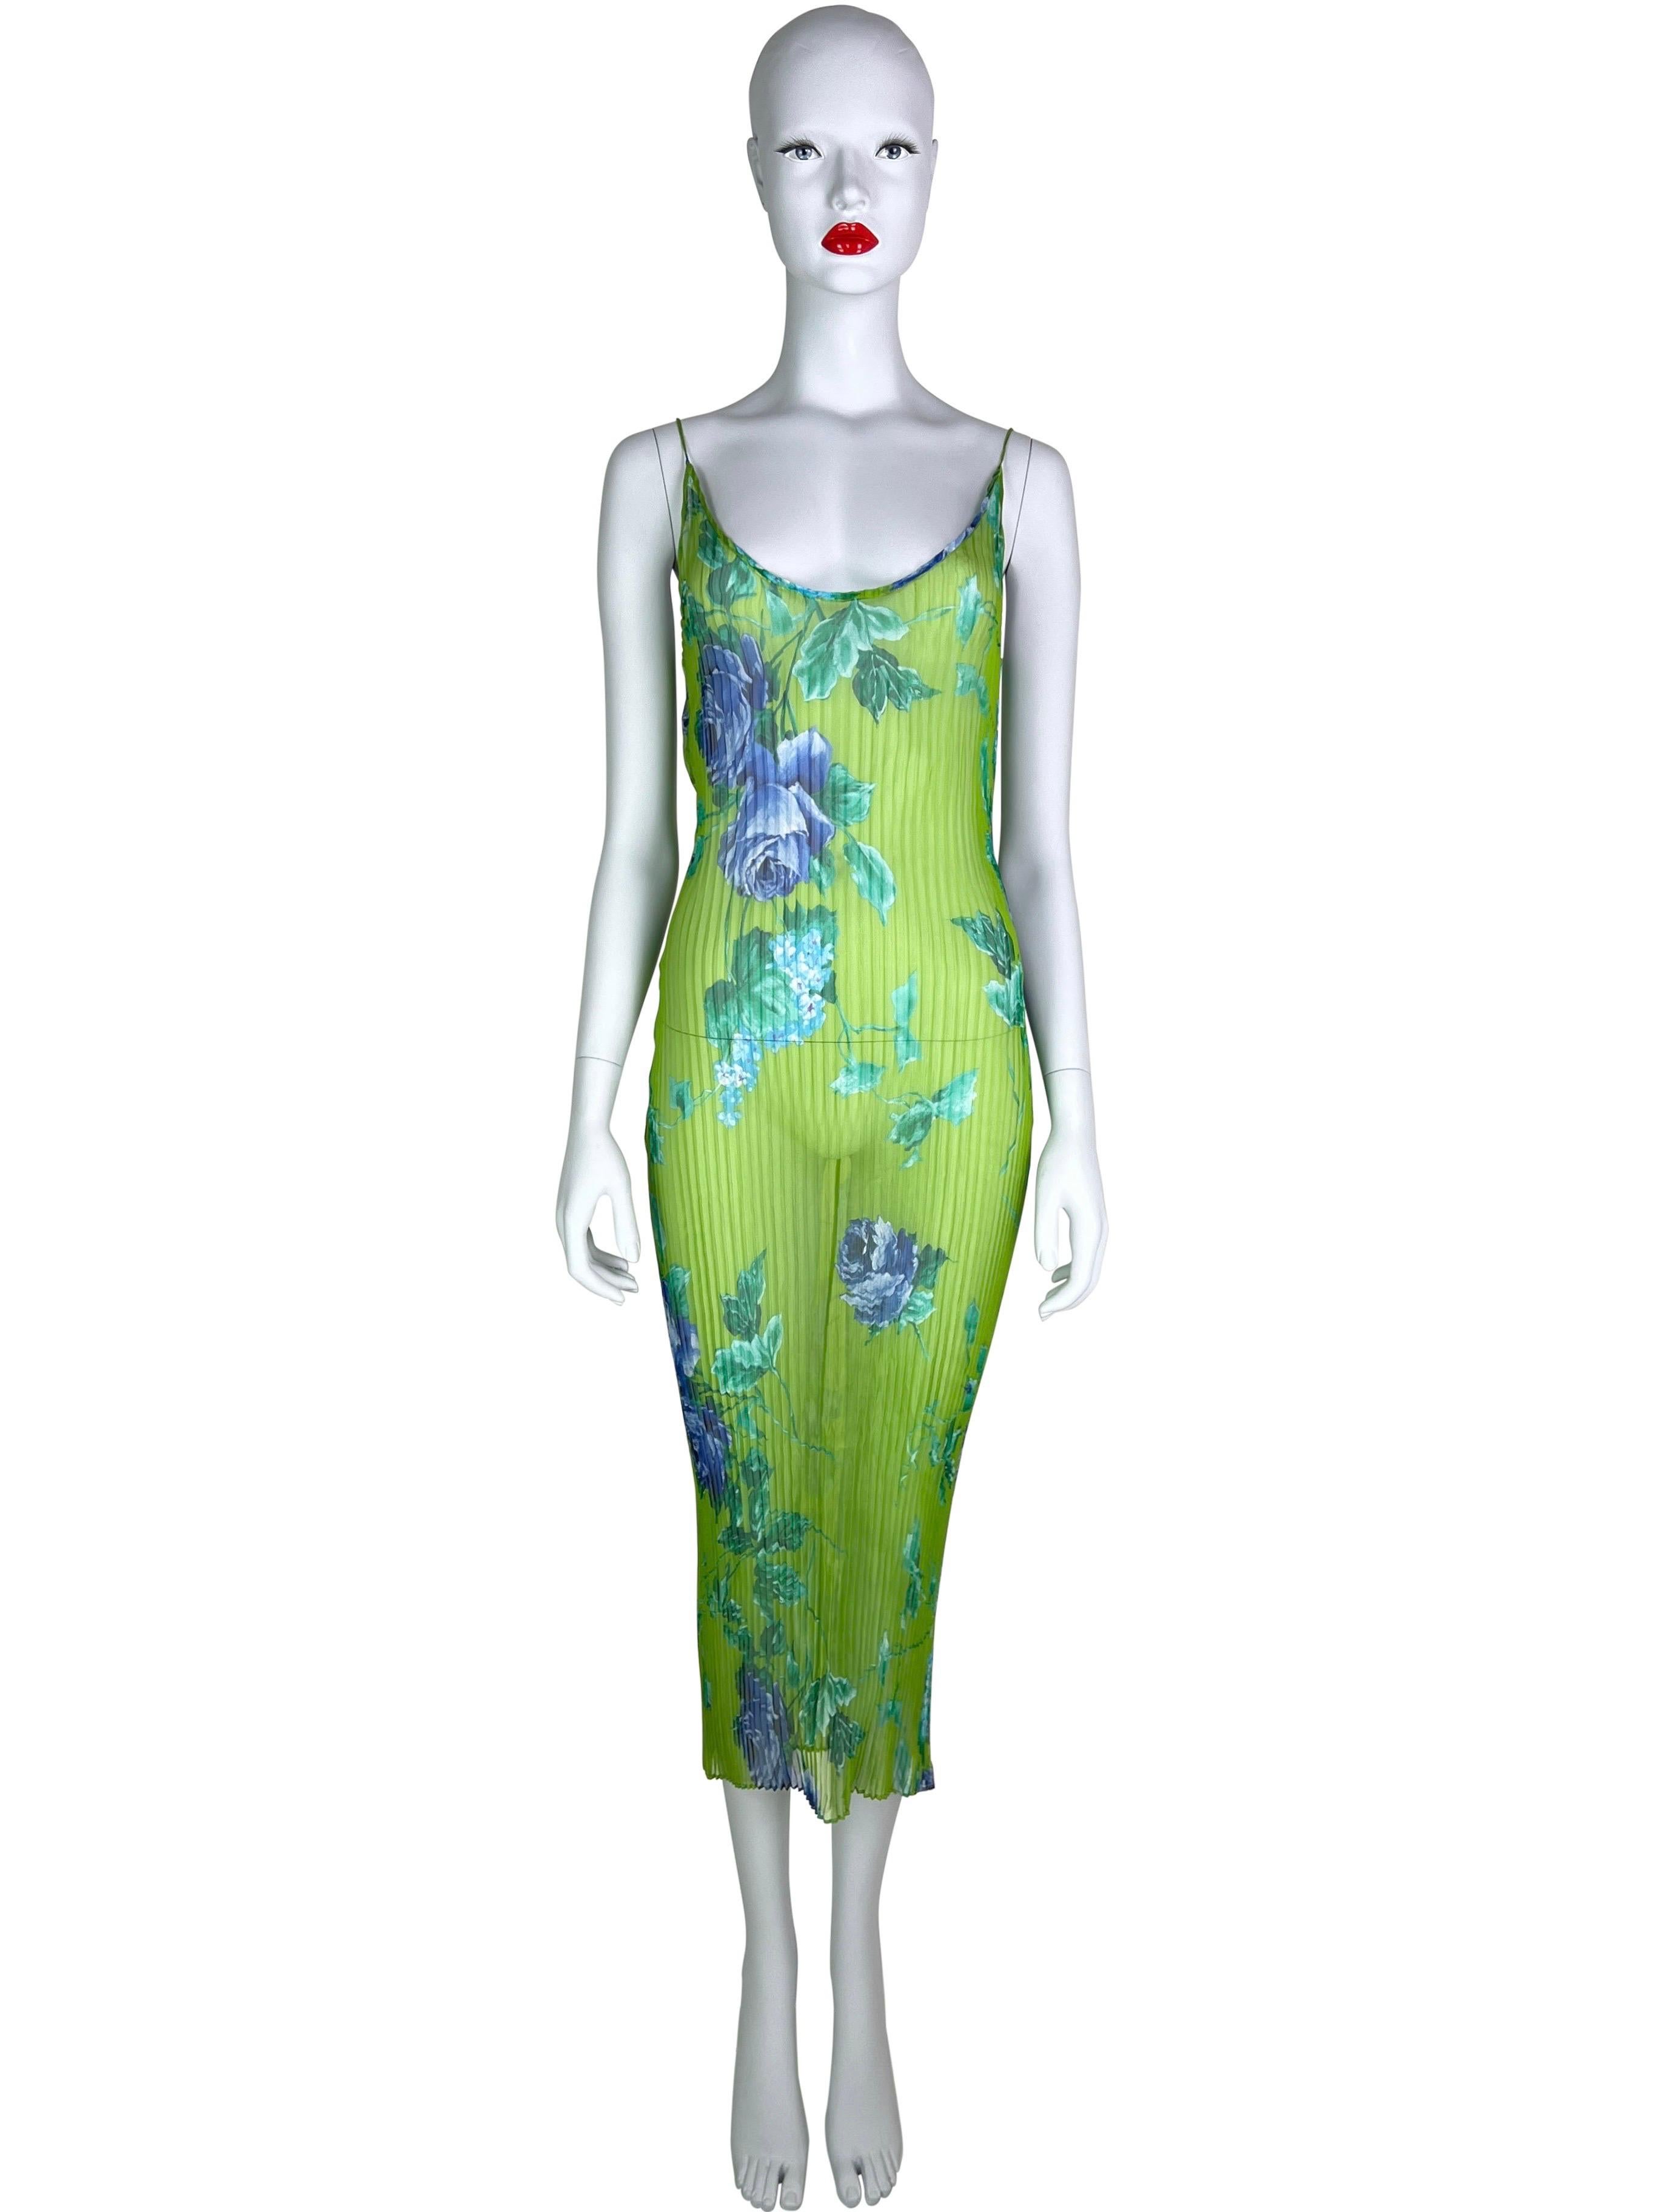 Fall 2000 Dolce & Gabbana Pleated Silk Dress In Excellent Condition For Sale In Prague, CZ